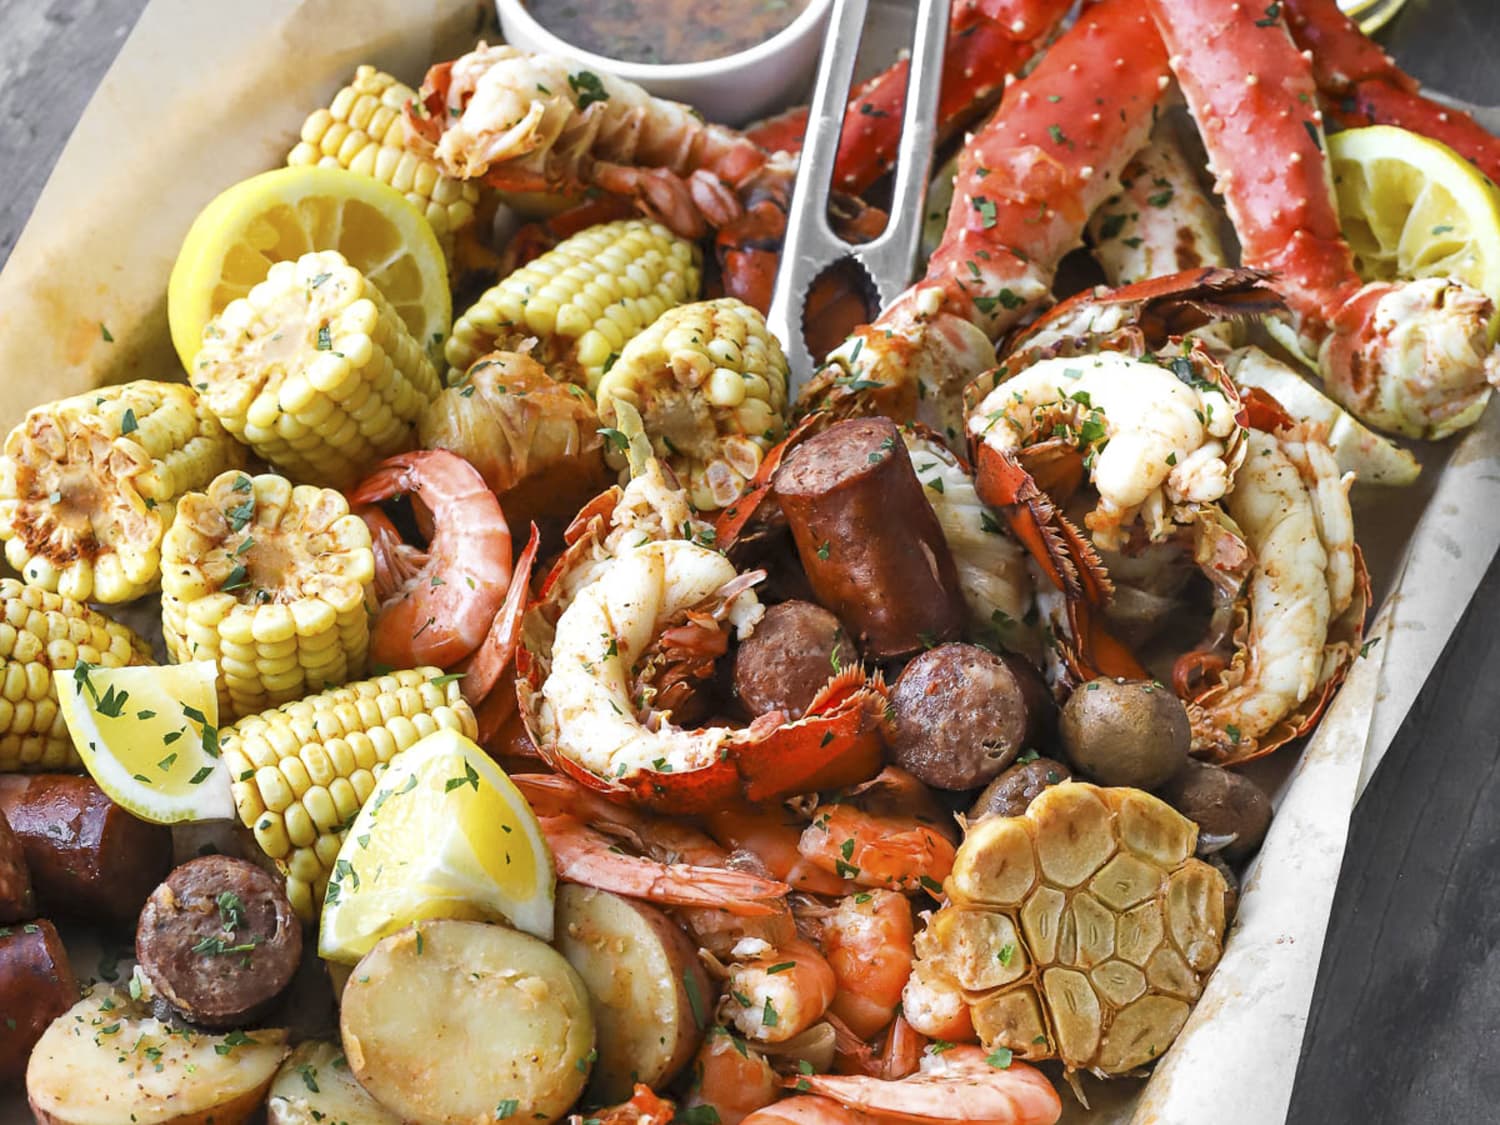 Seafood Boil Recipe - Dinner at the Zoo